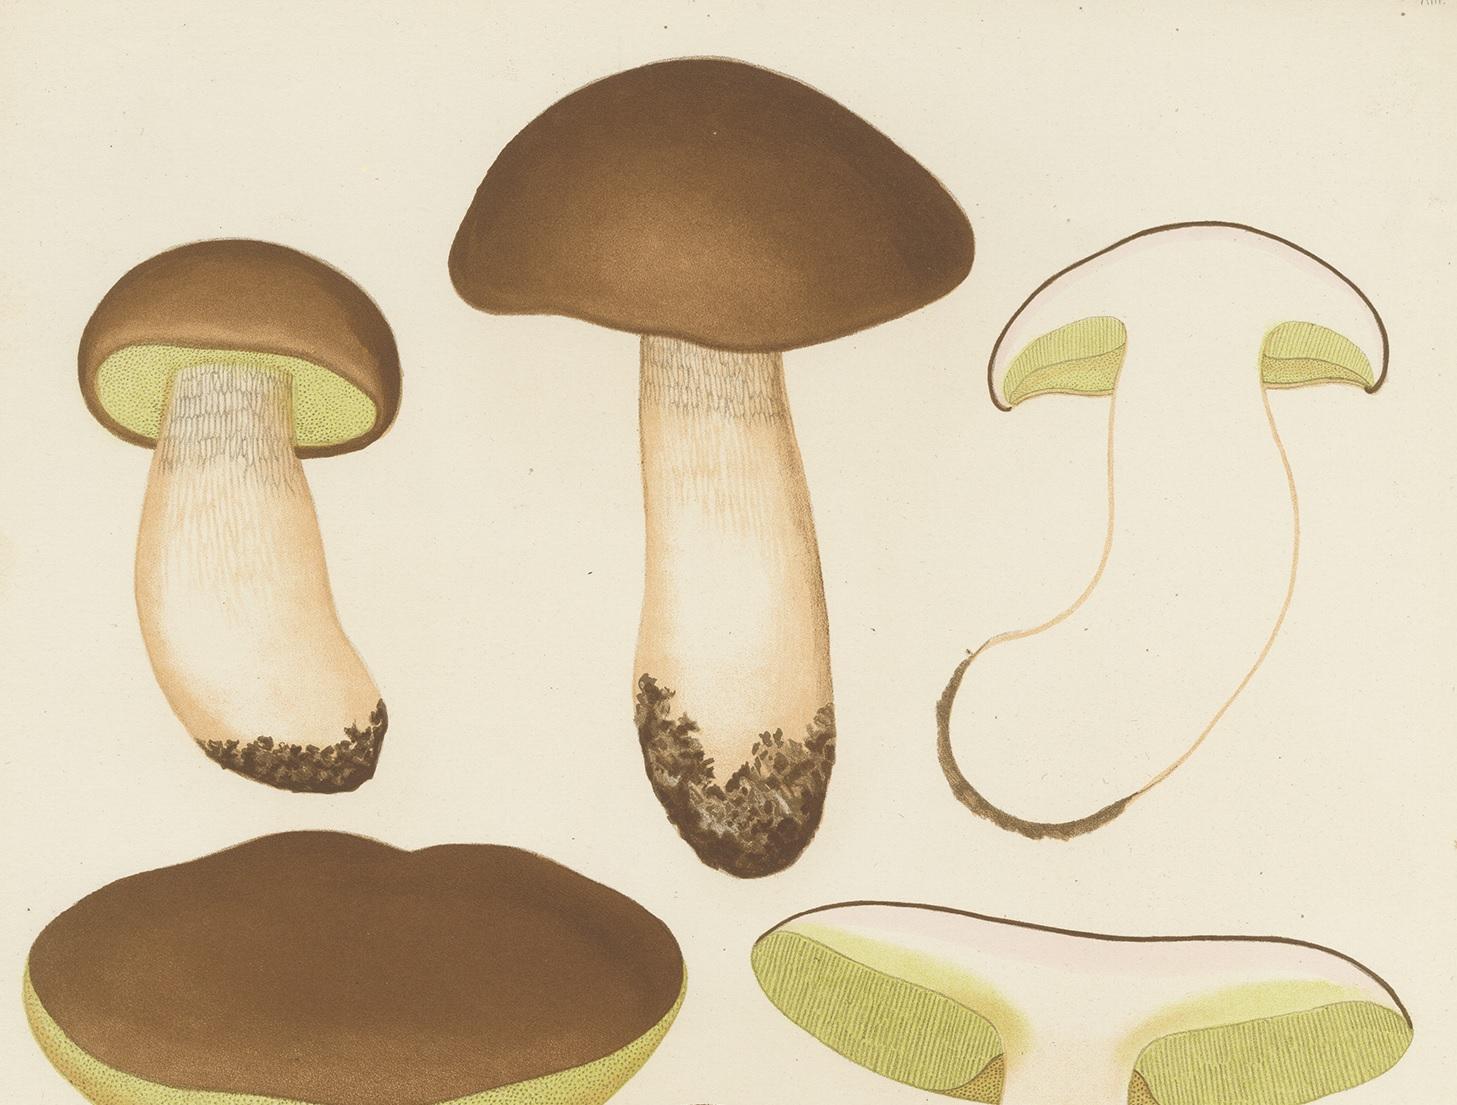 19th Century Antique Mycology Print of Boletus Edulis by E.M. Fries, circa 1860 For Sale